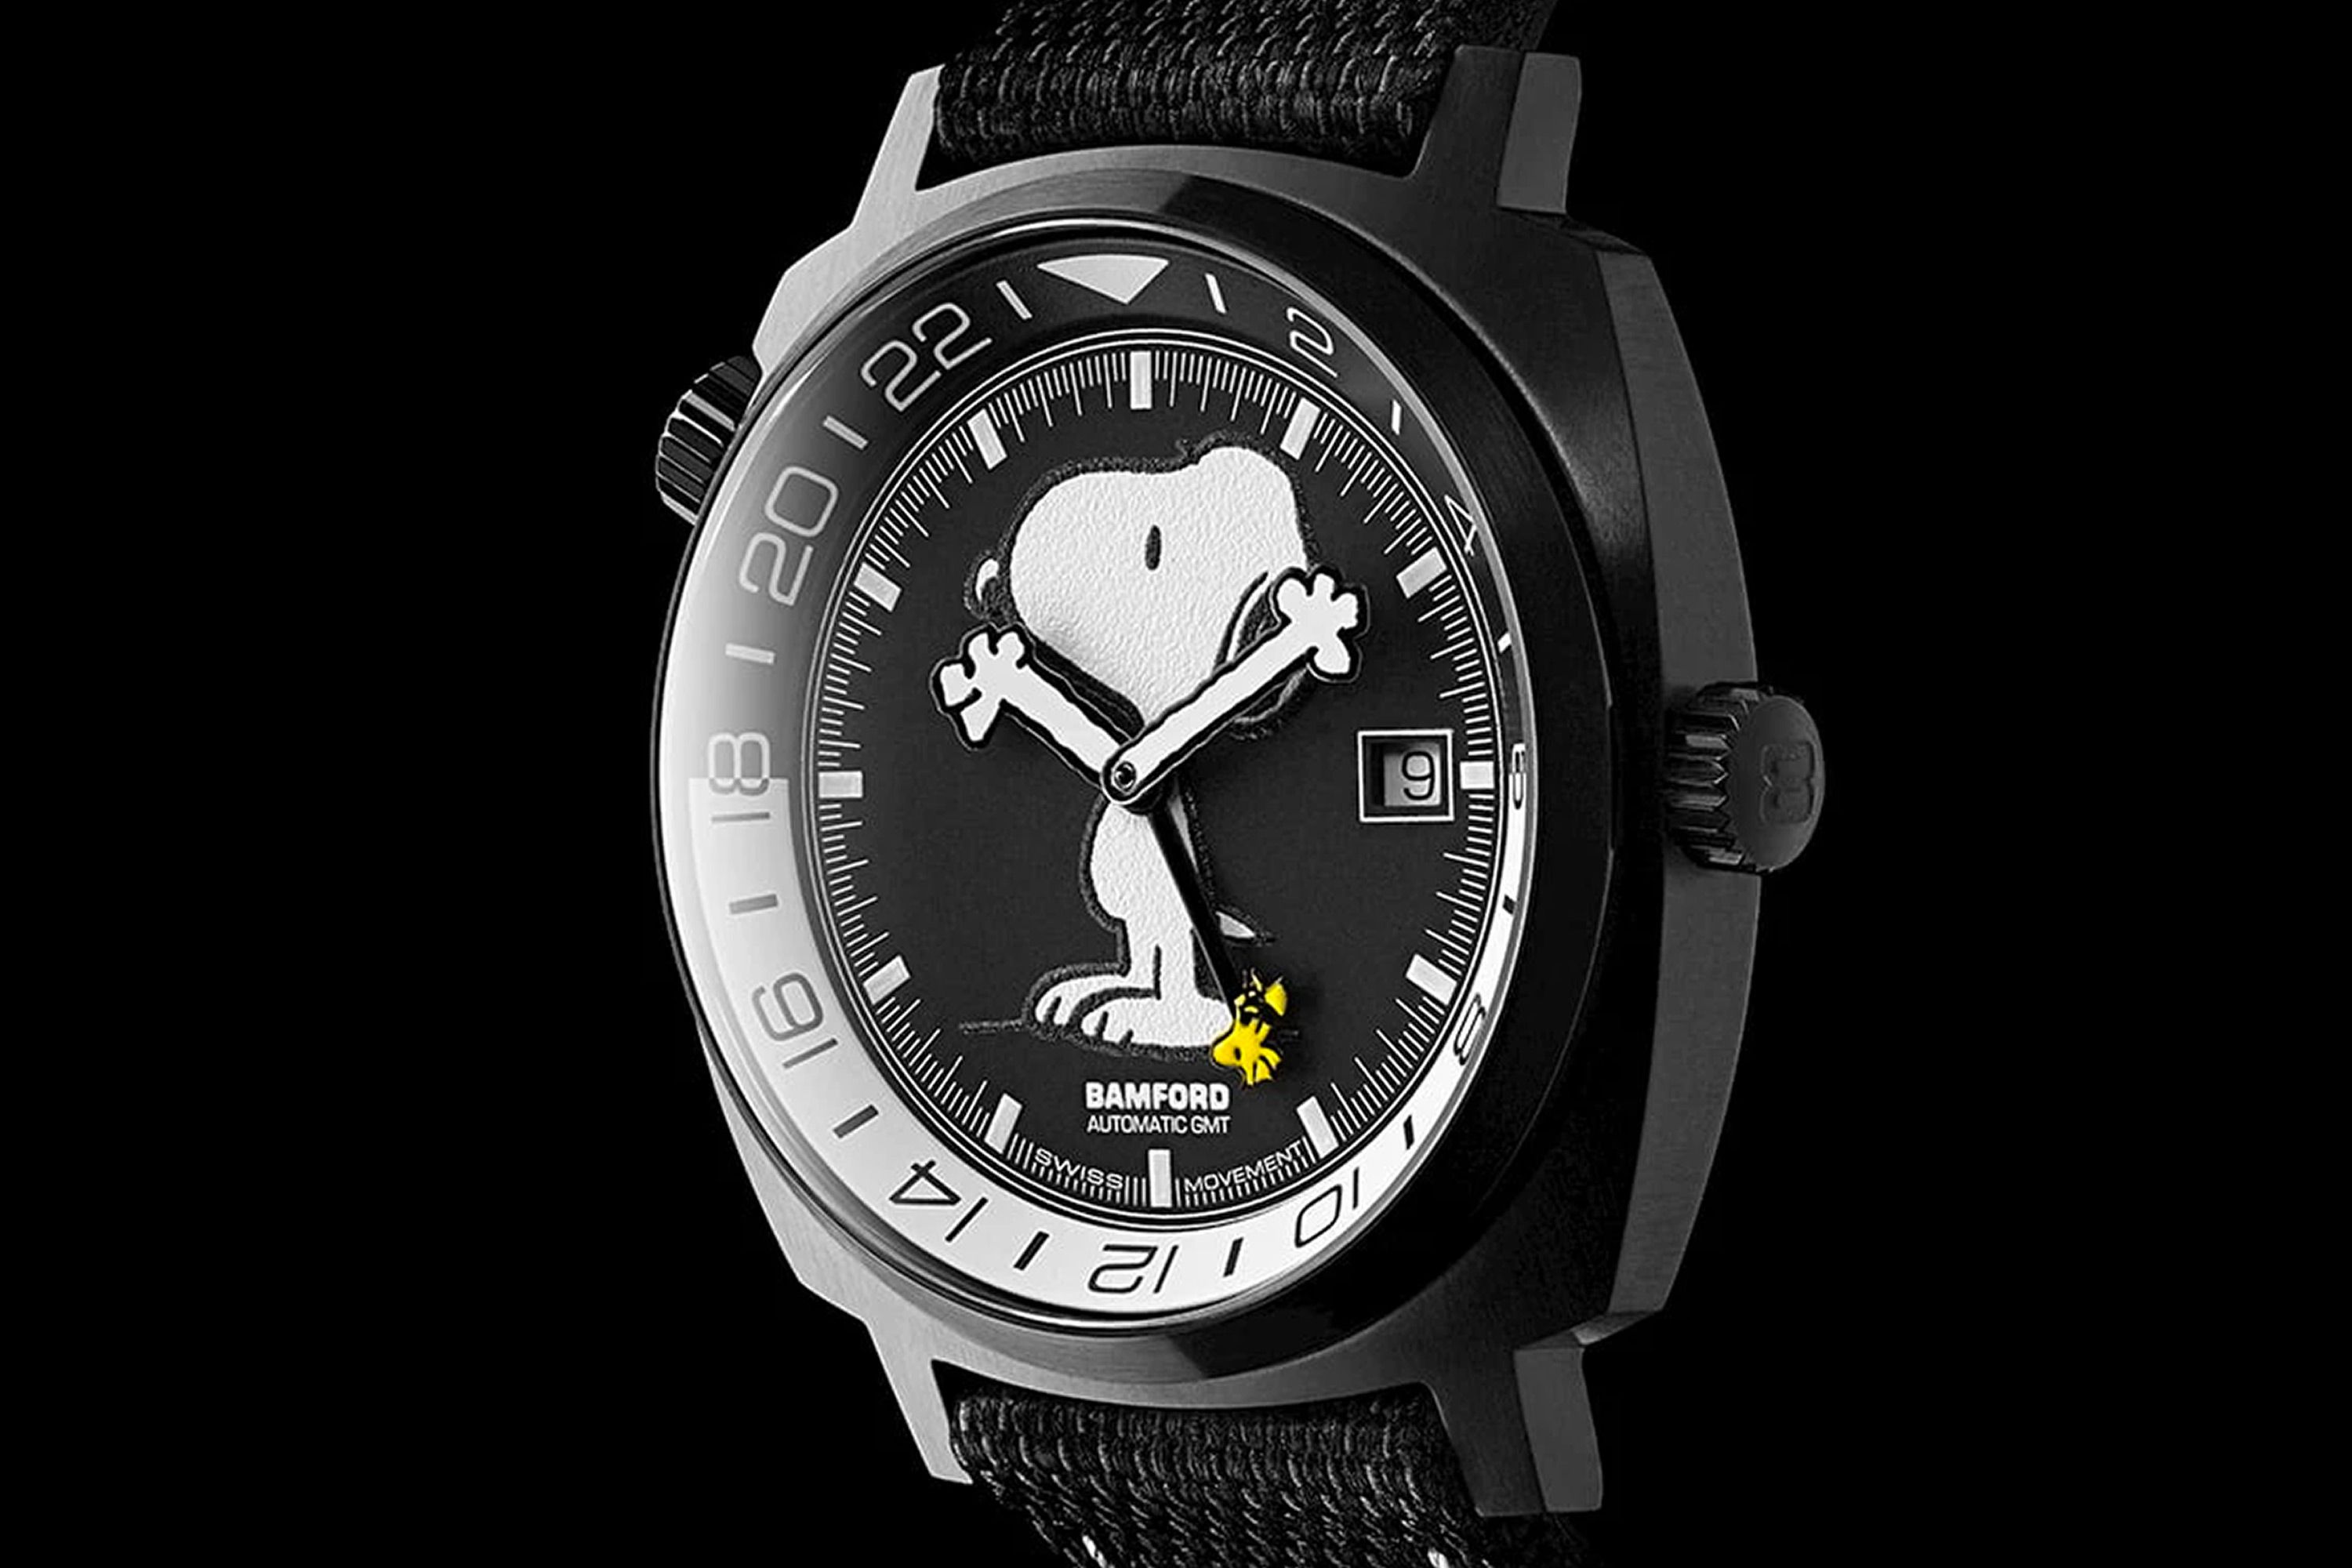 What's With All the Snoopy Watches This Year?